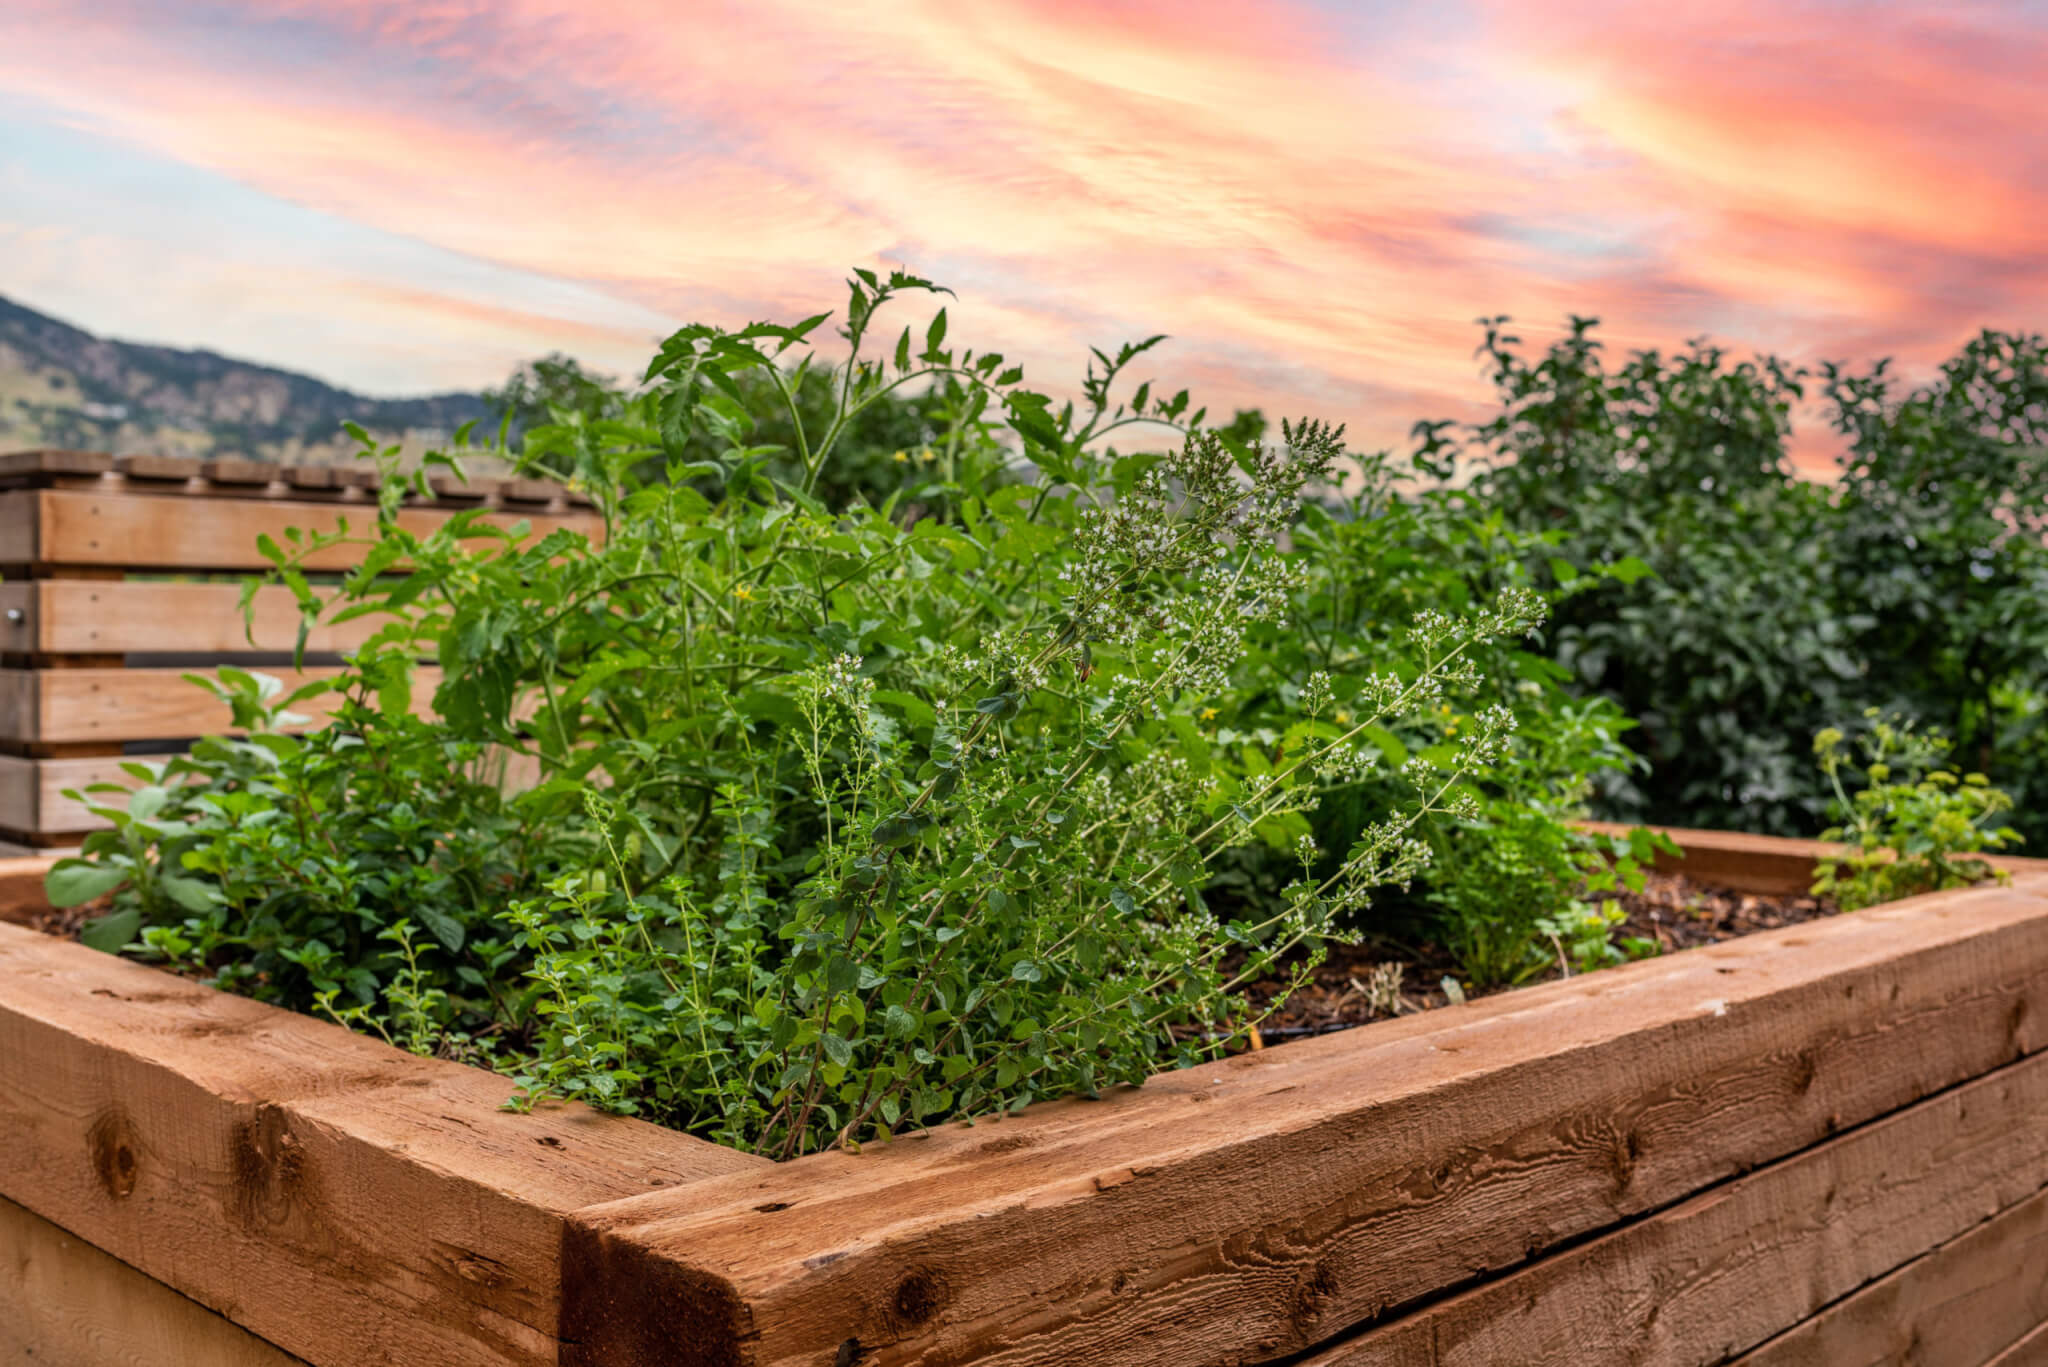 wood garden box with native plants inside. Sunset in Boulder Colorado